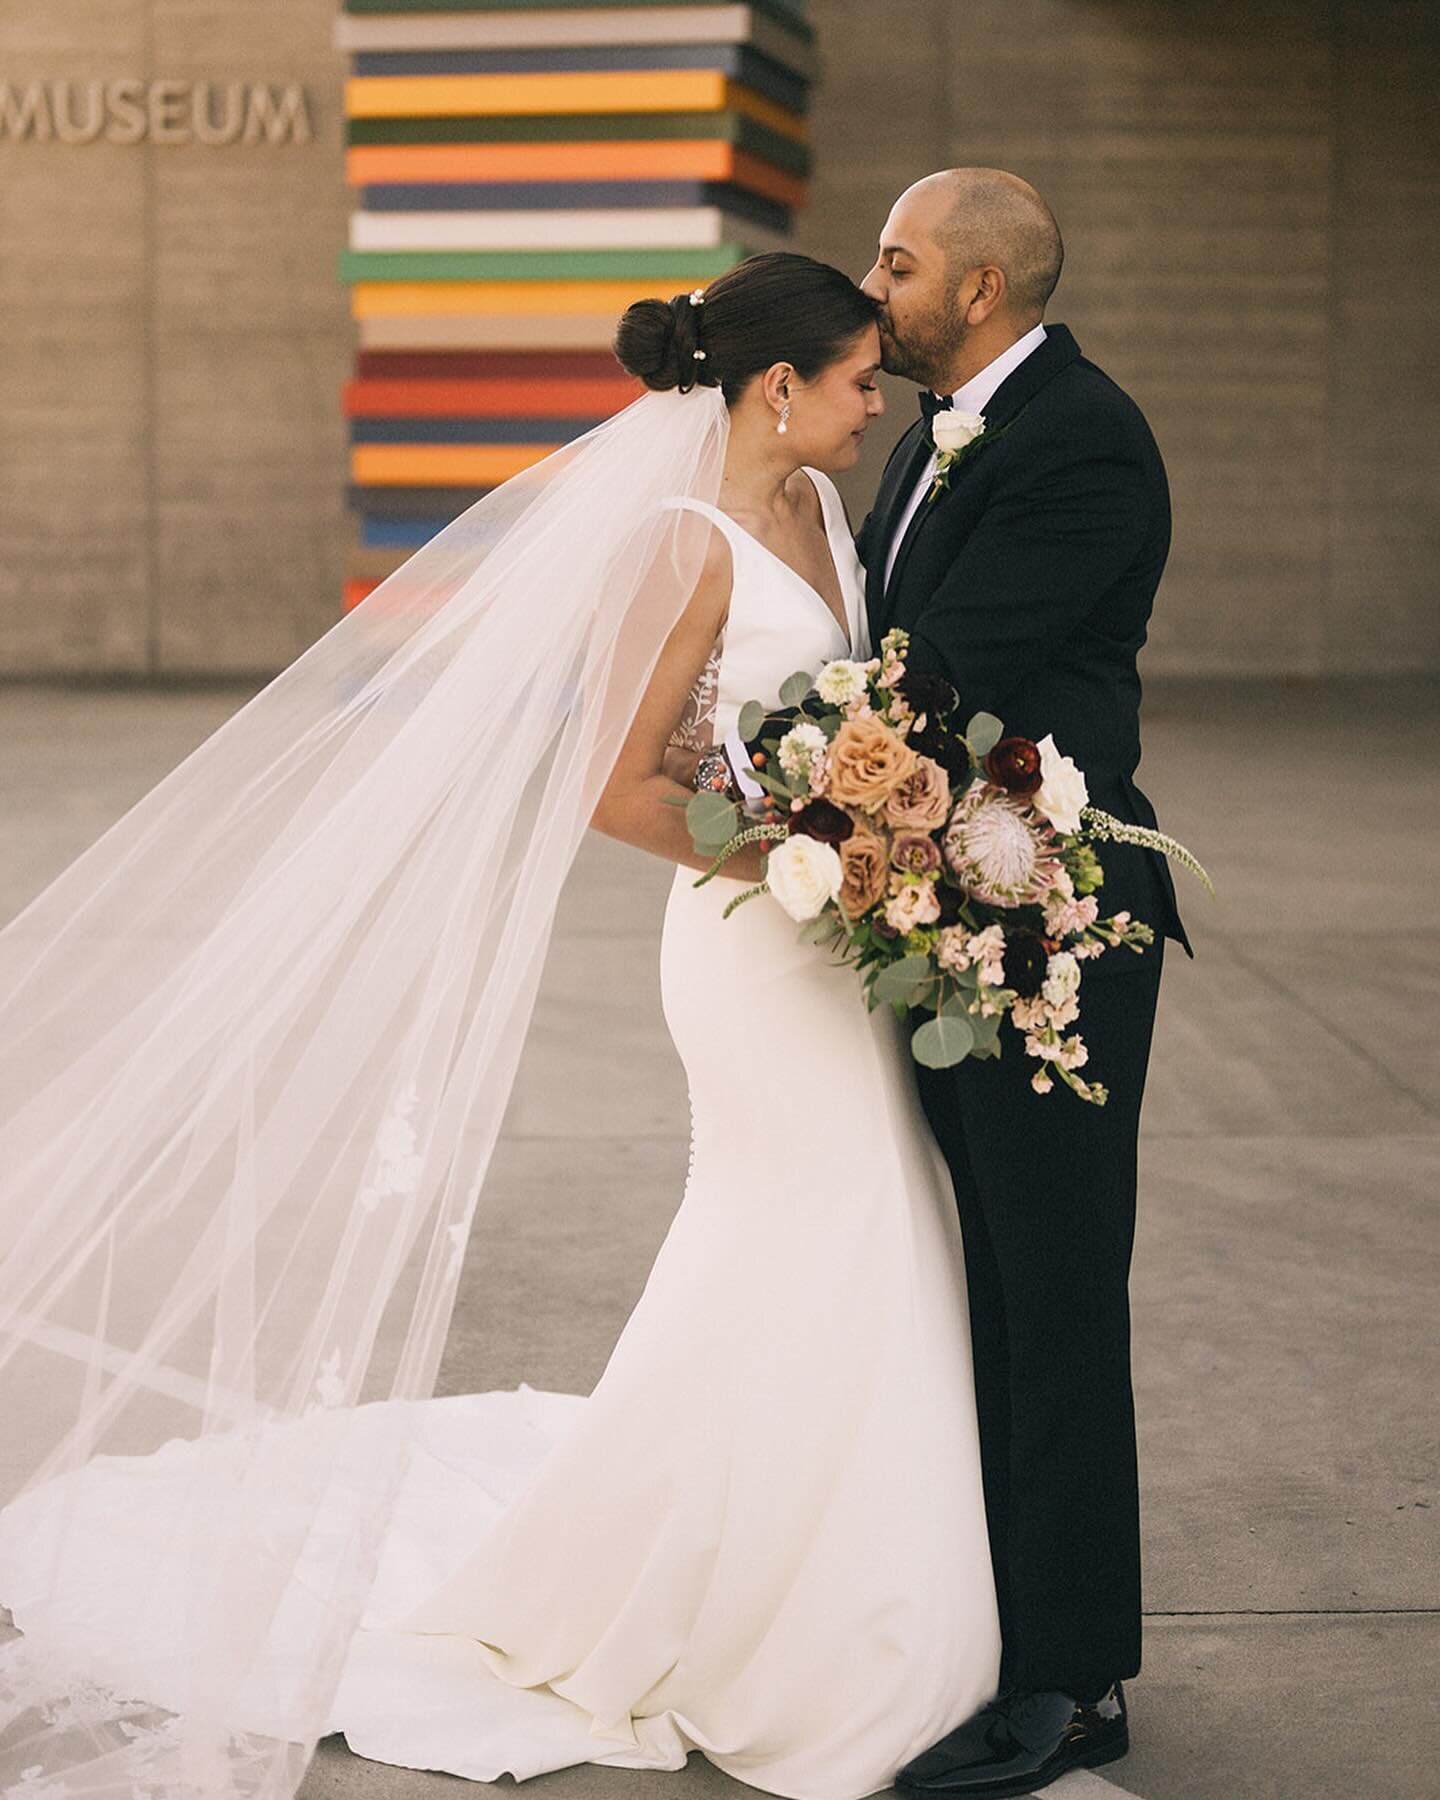 Modern meets timeless elegance in a symphony of colors, textures and artistry at the @speedartmuseum for Katie and Ruben. 

✨live✨ on the Botanica Blog. 

Photographer: @sarahkatherinedavisphotography 
Coordinator: @plannedperfectionevents 
Venue: @s